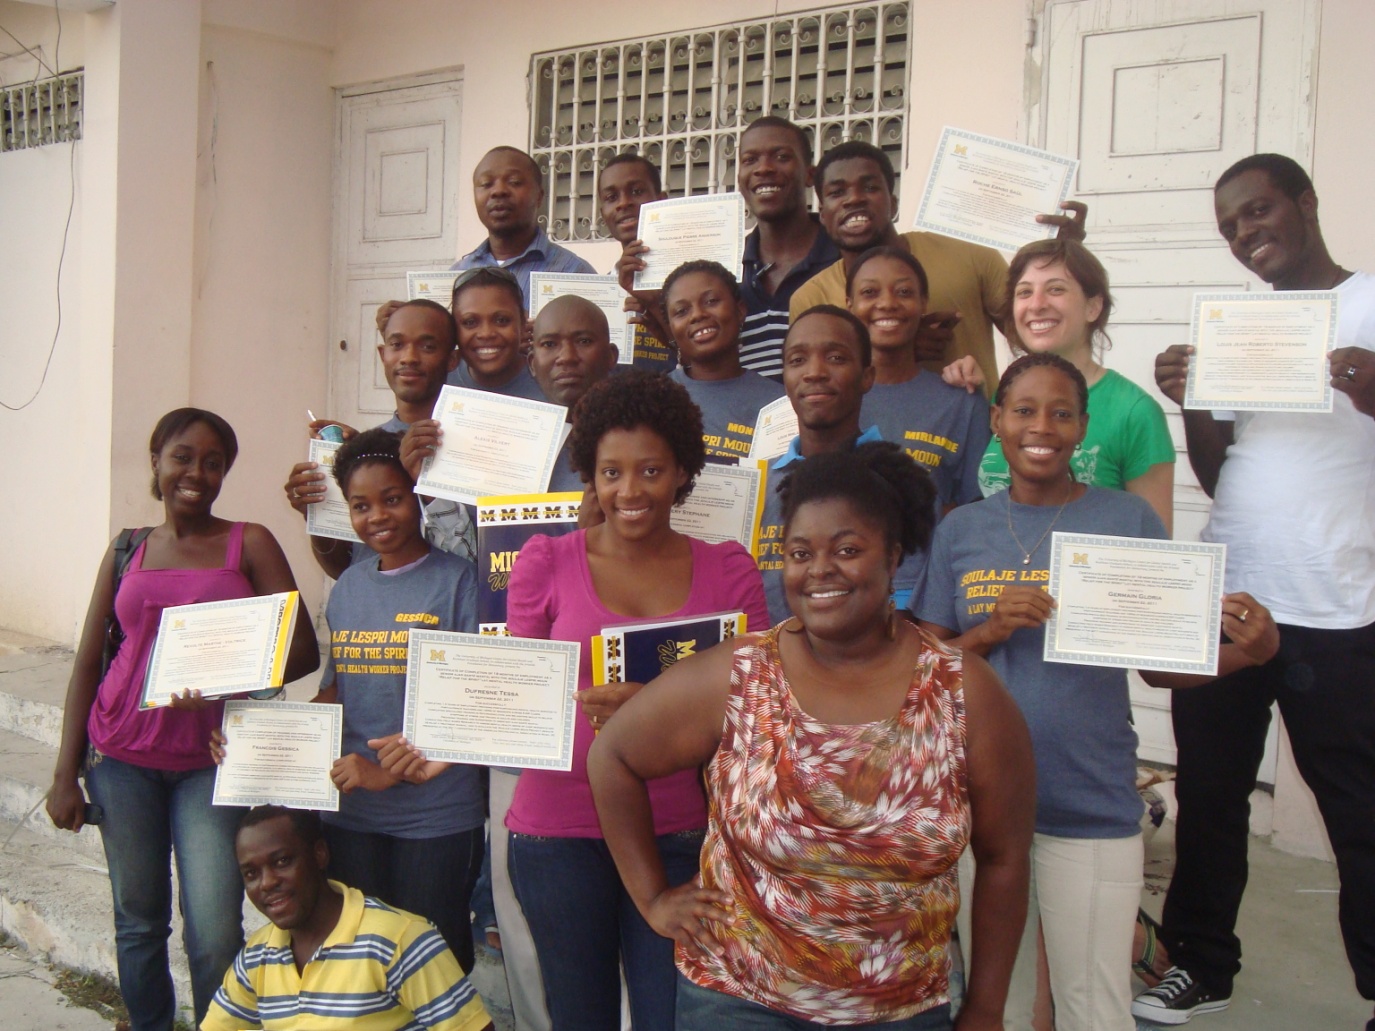 SLM staff receiving certificates of completion following training session